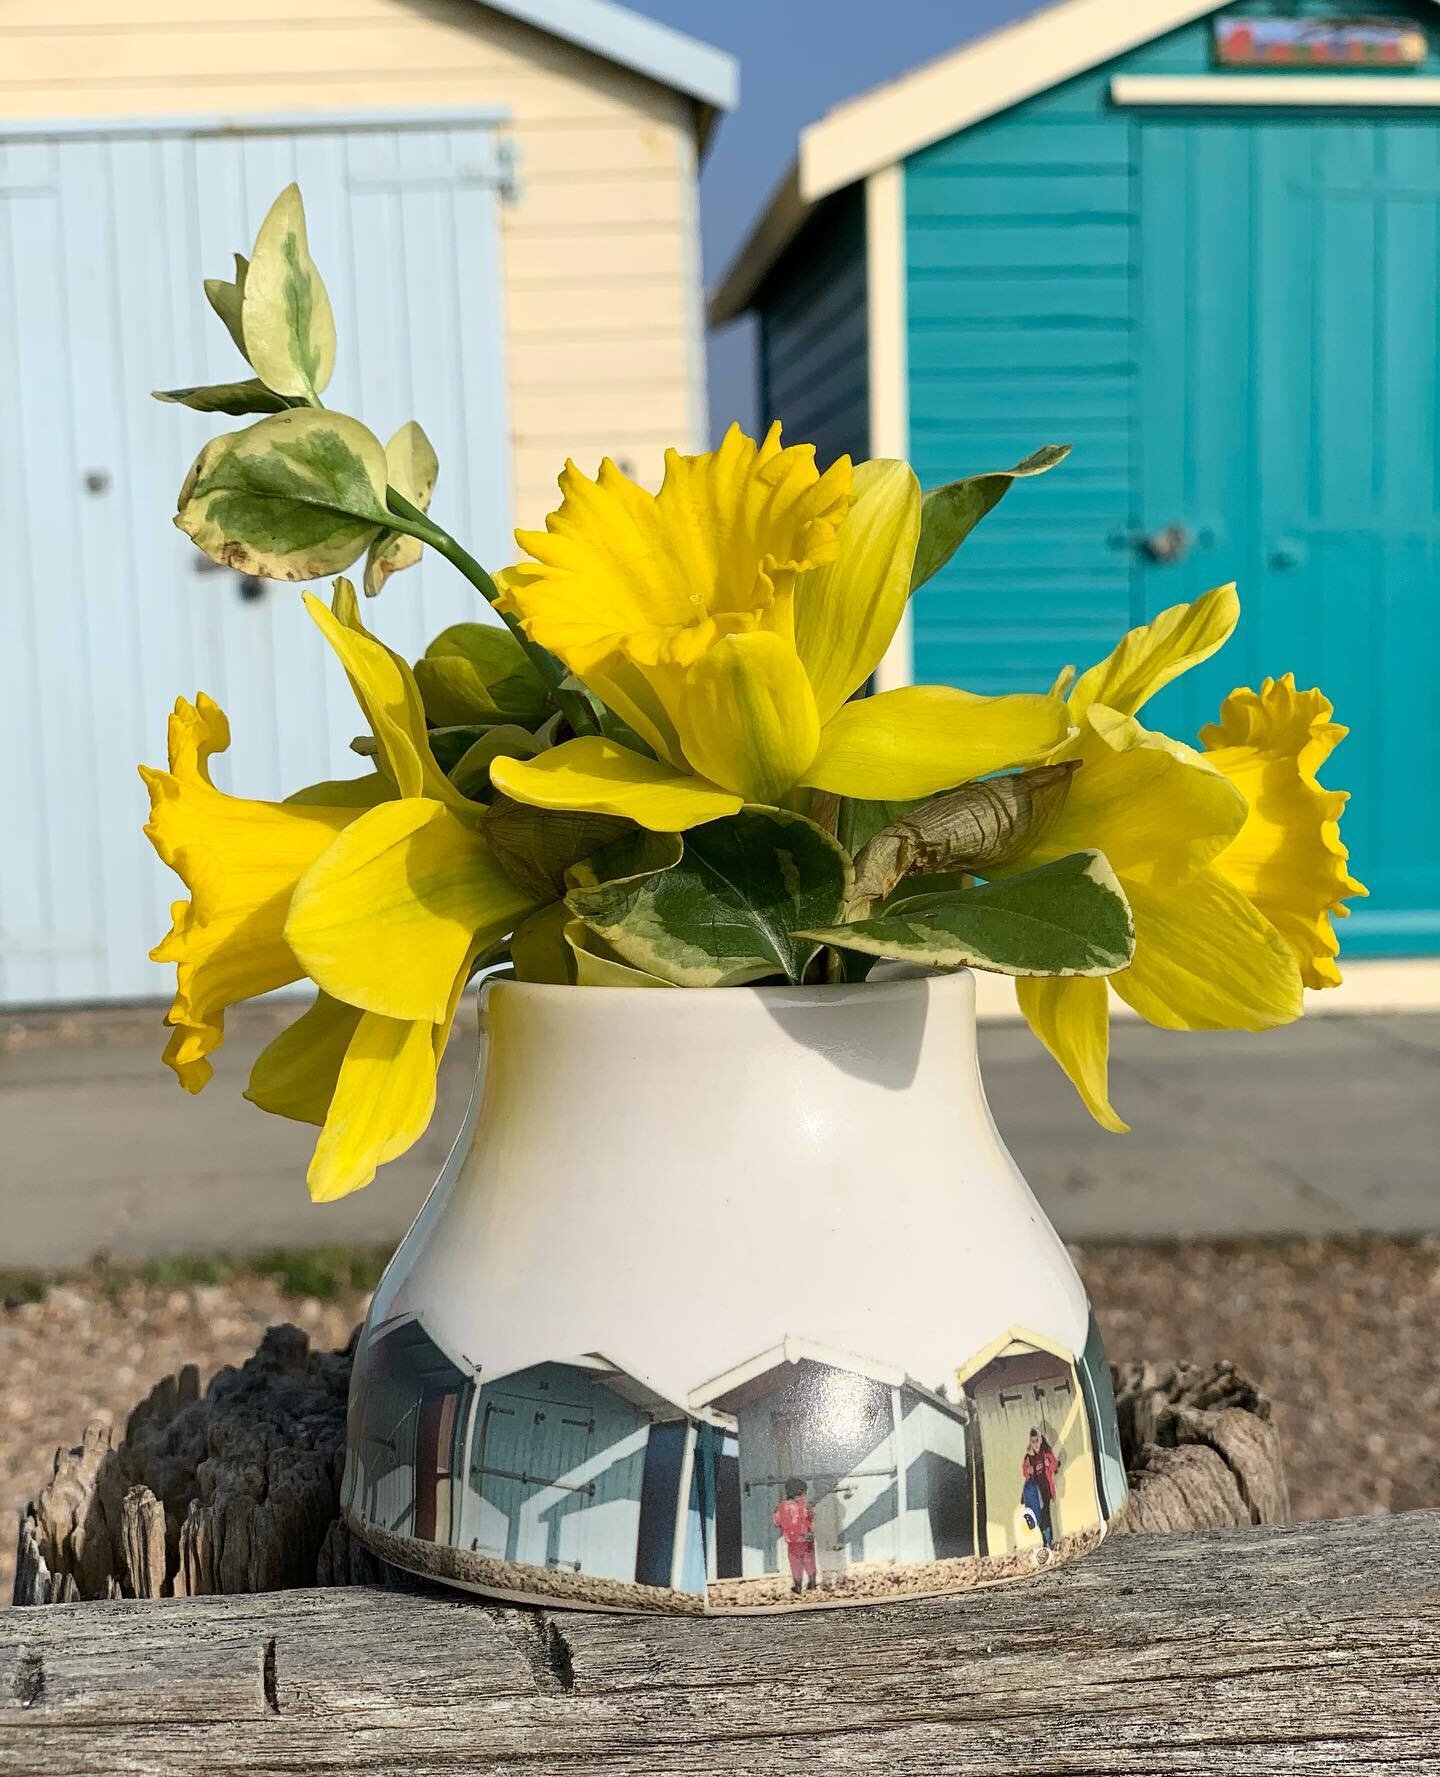 Just over a week to go till mothersday. I have a few more of these beach huts vases on sale. Go to my shopify under my profile picture if you&rsquo;d like one ❤️ or DM me for more info ❤️ #beachhut
##mother
#mothersday
#love
#motherhood
#mum
#mother
